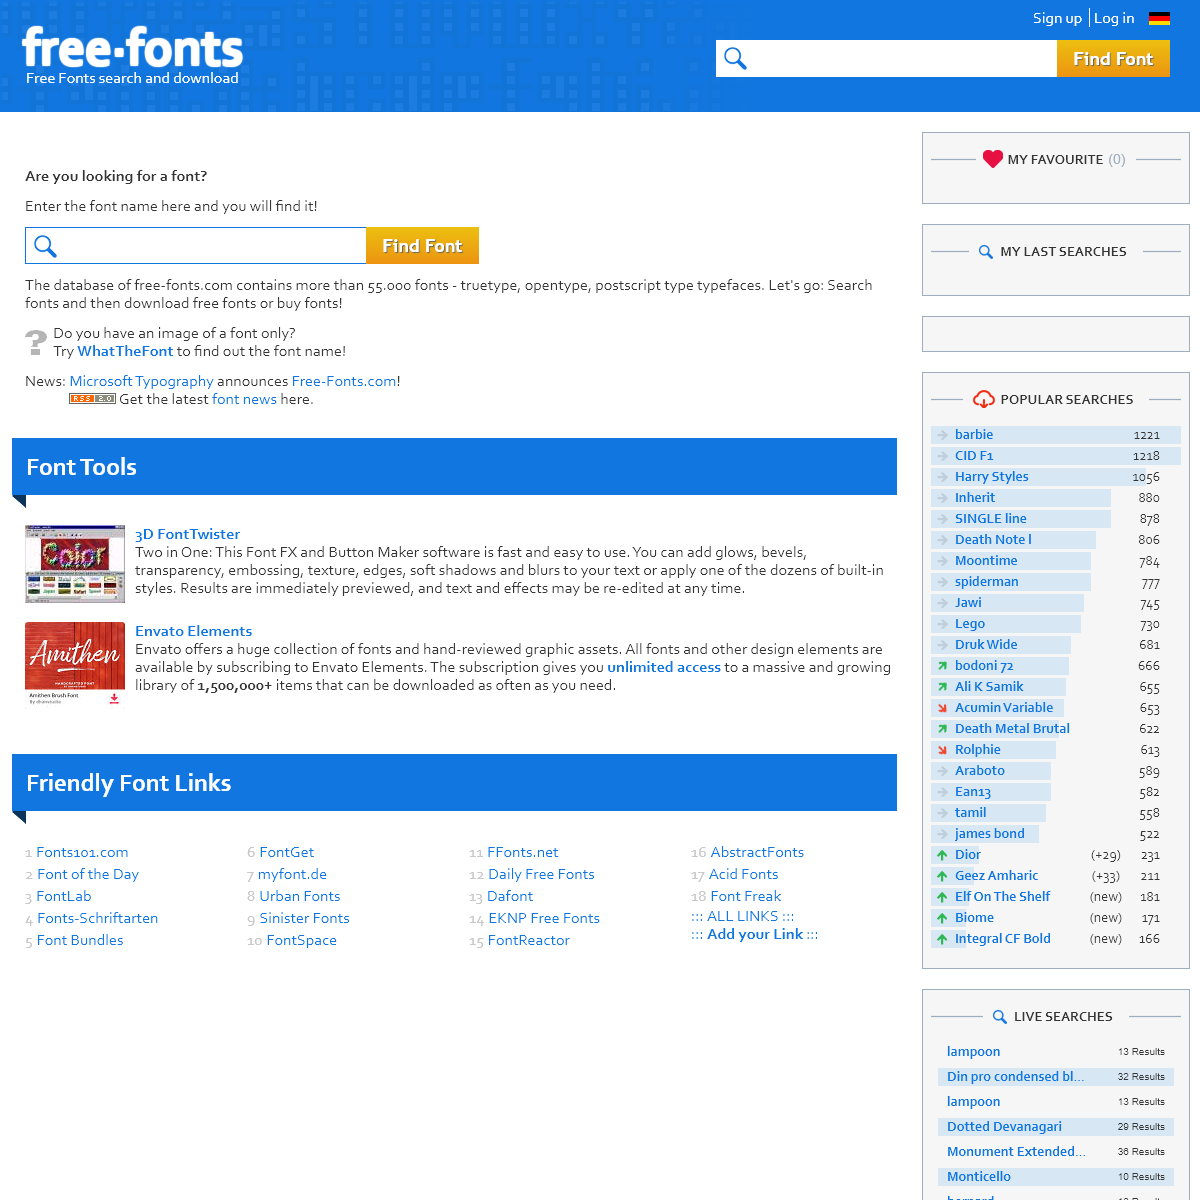 A complete backup of free-fonts.com